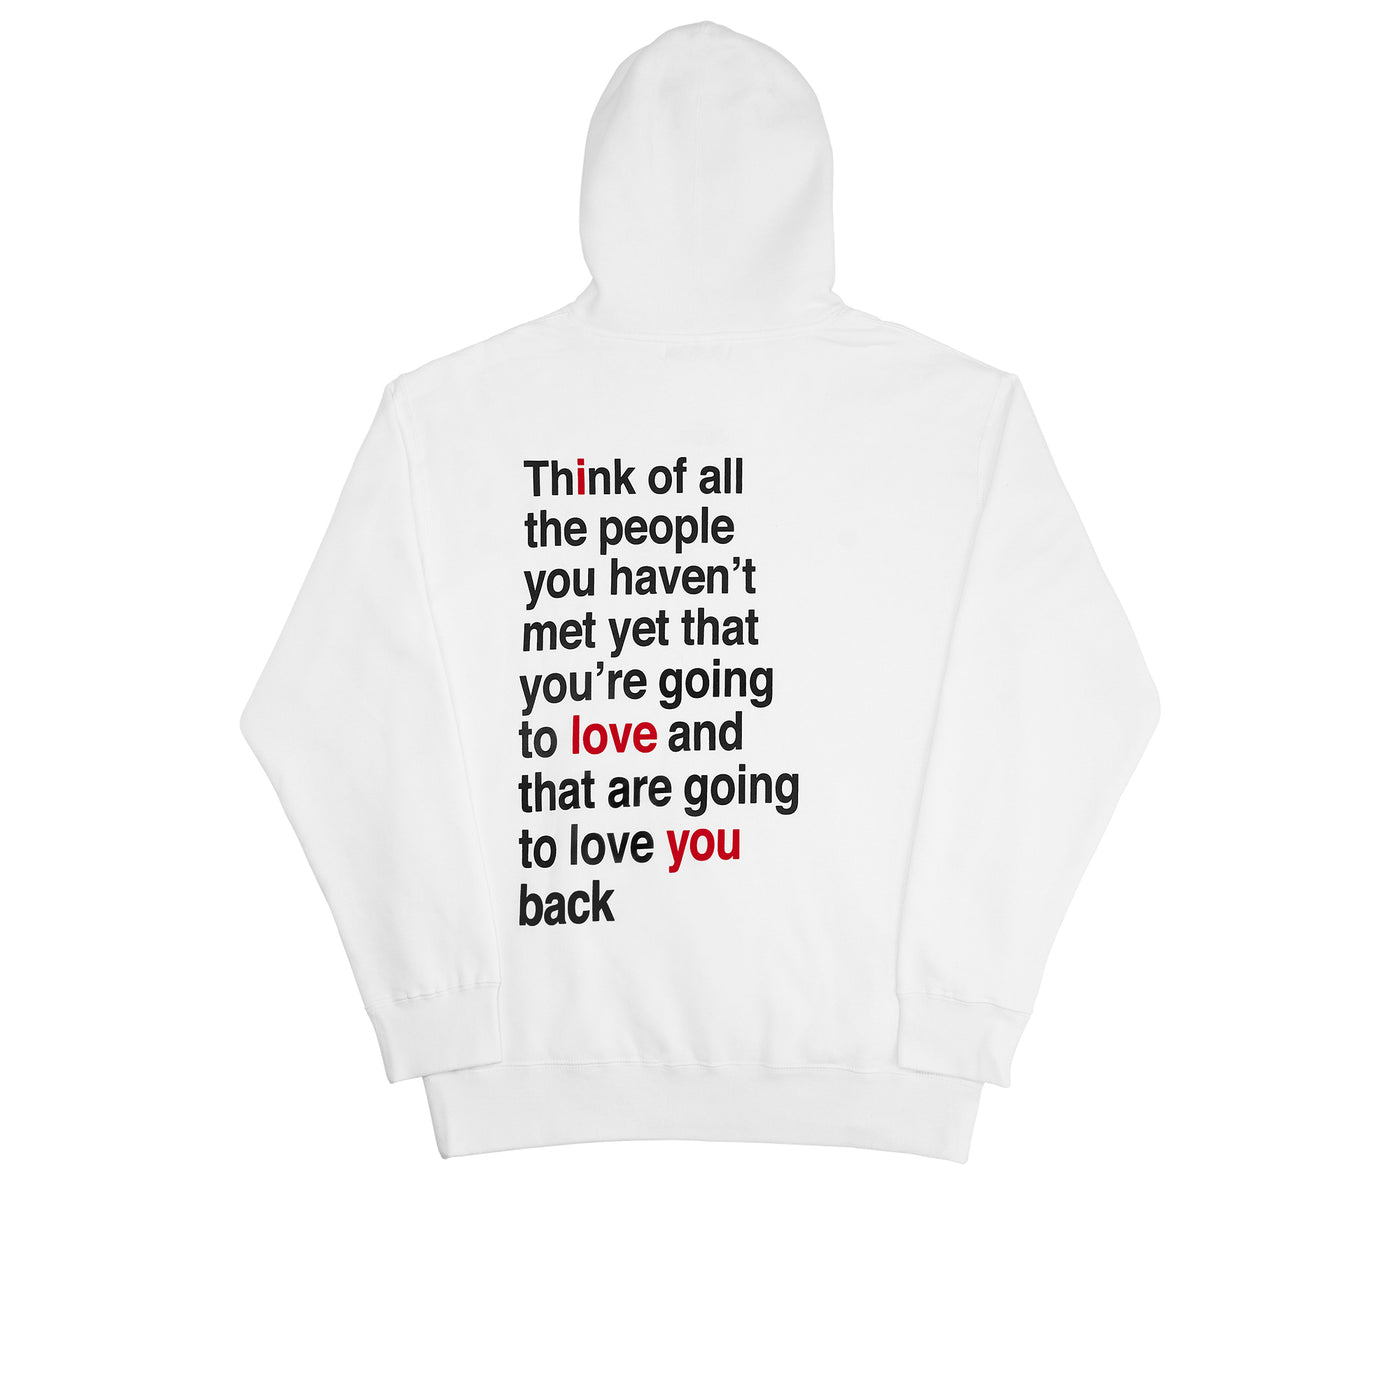 We're Not Really Strangers white I Love You Back Hoodie back facing view of hoodie reading in black font "Think of all the people you haven't met yet that you're going to love and that are going to love you back." With the text "I, love, you" in red font.